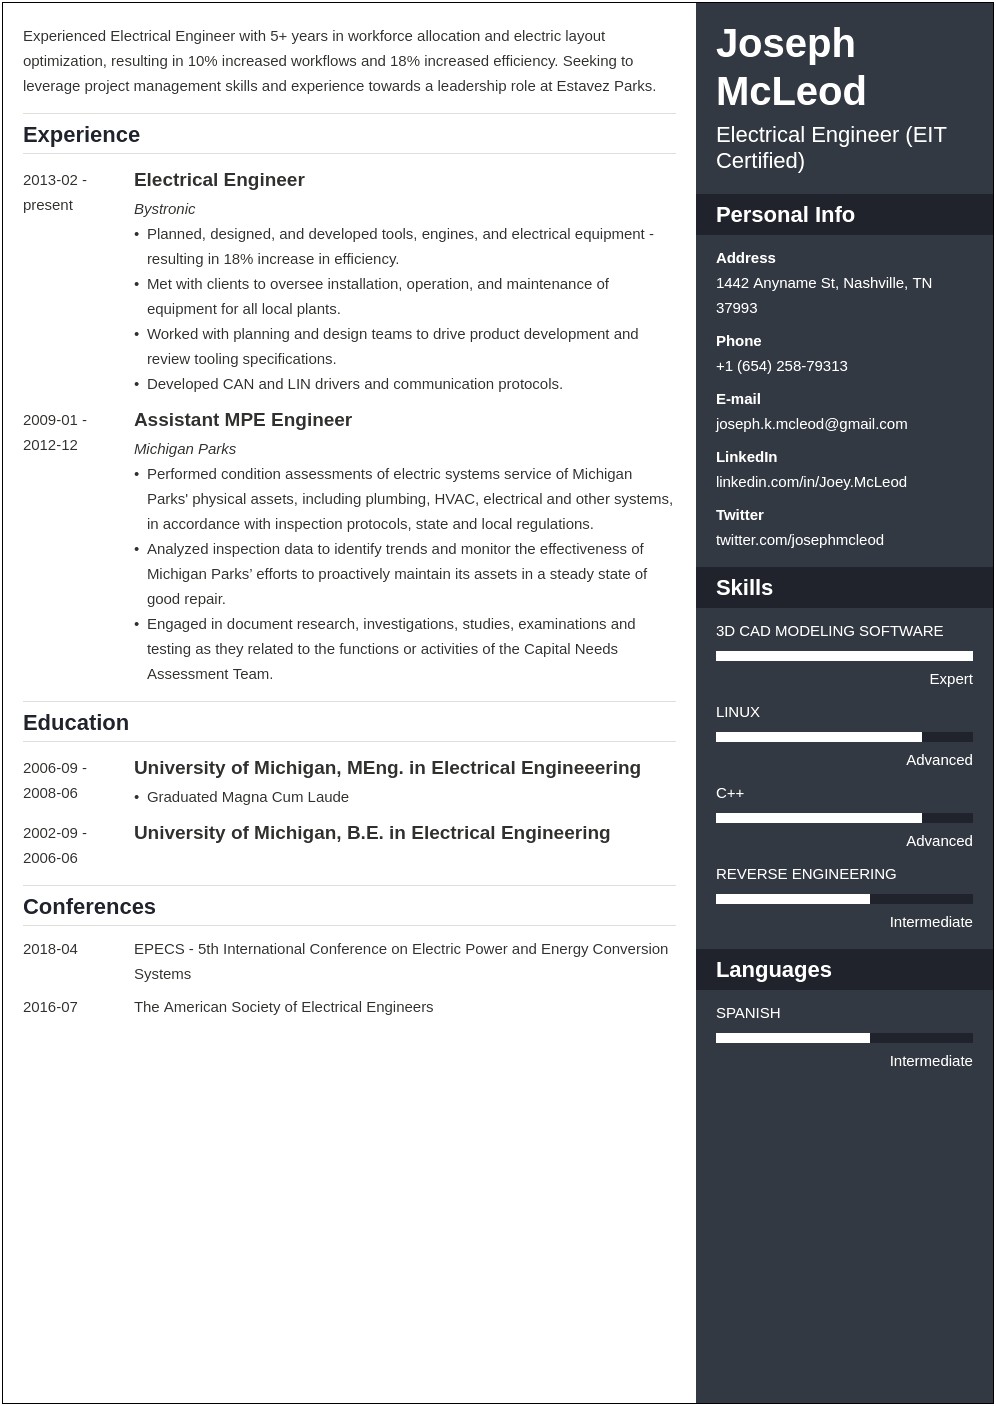 Resume Objective For Fresher Electrical Engineer